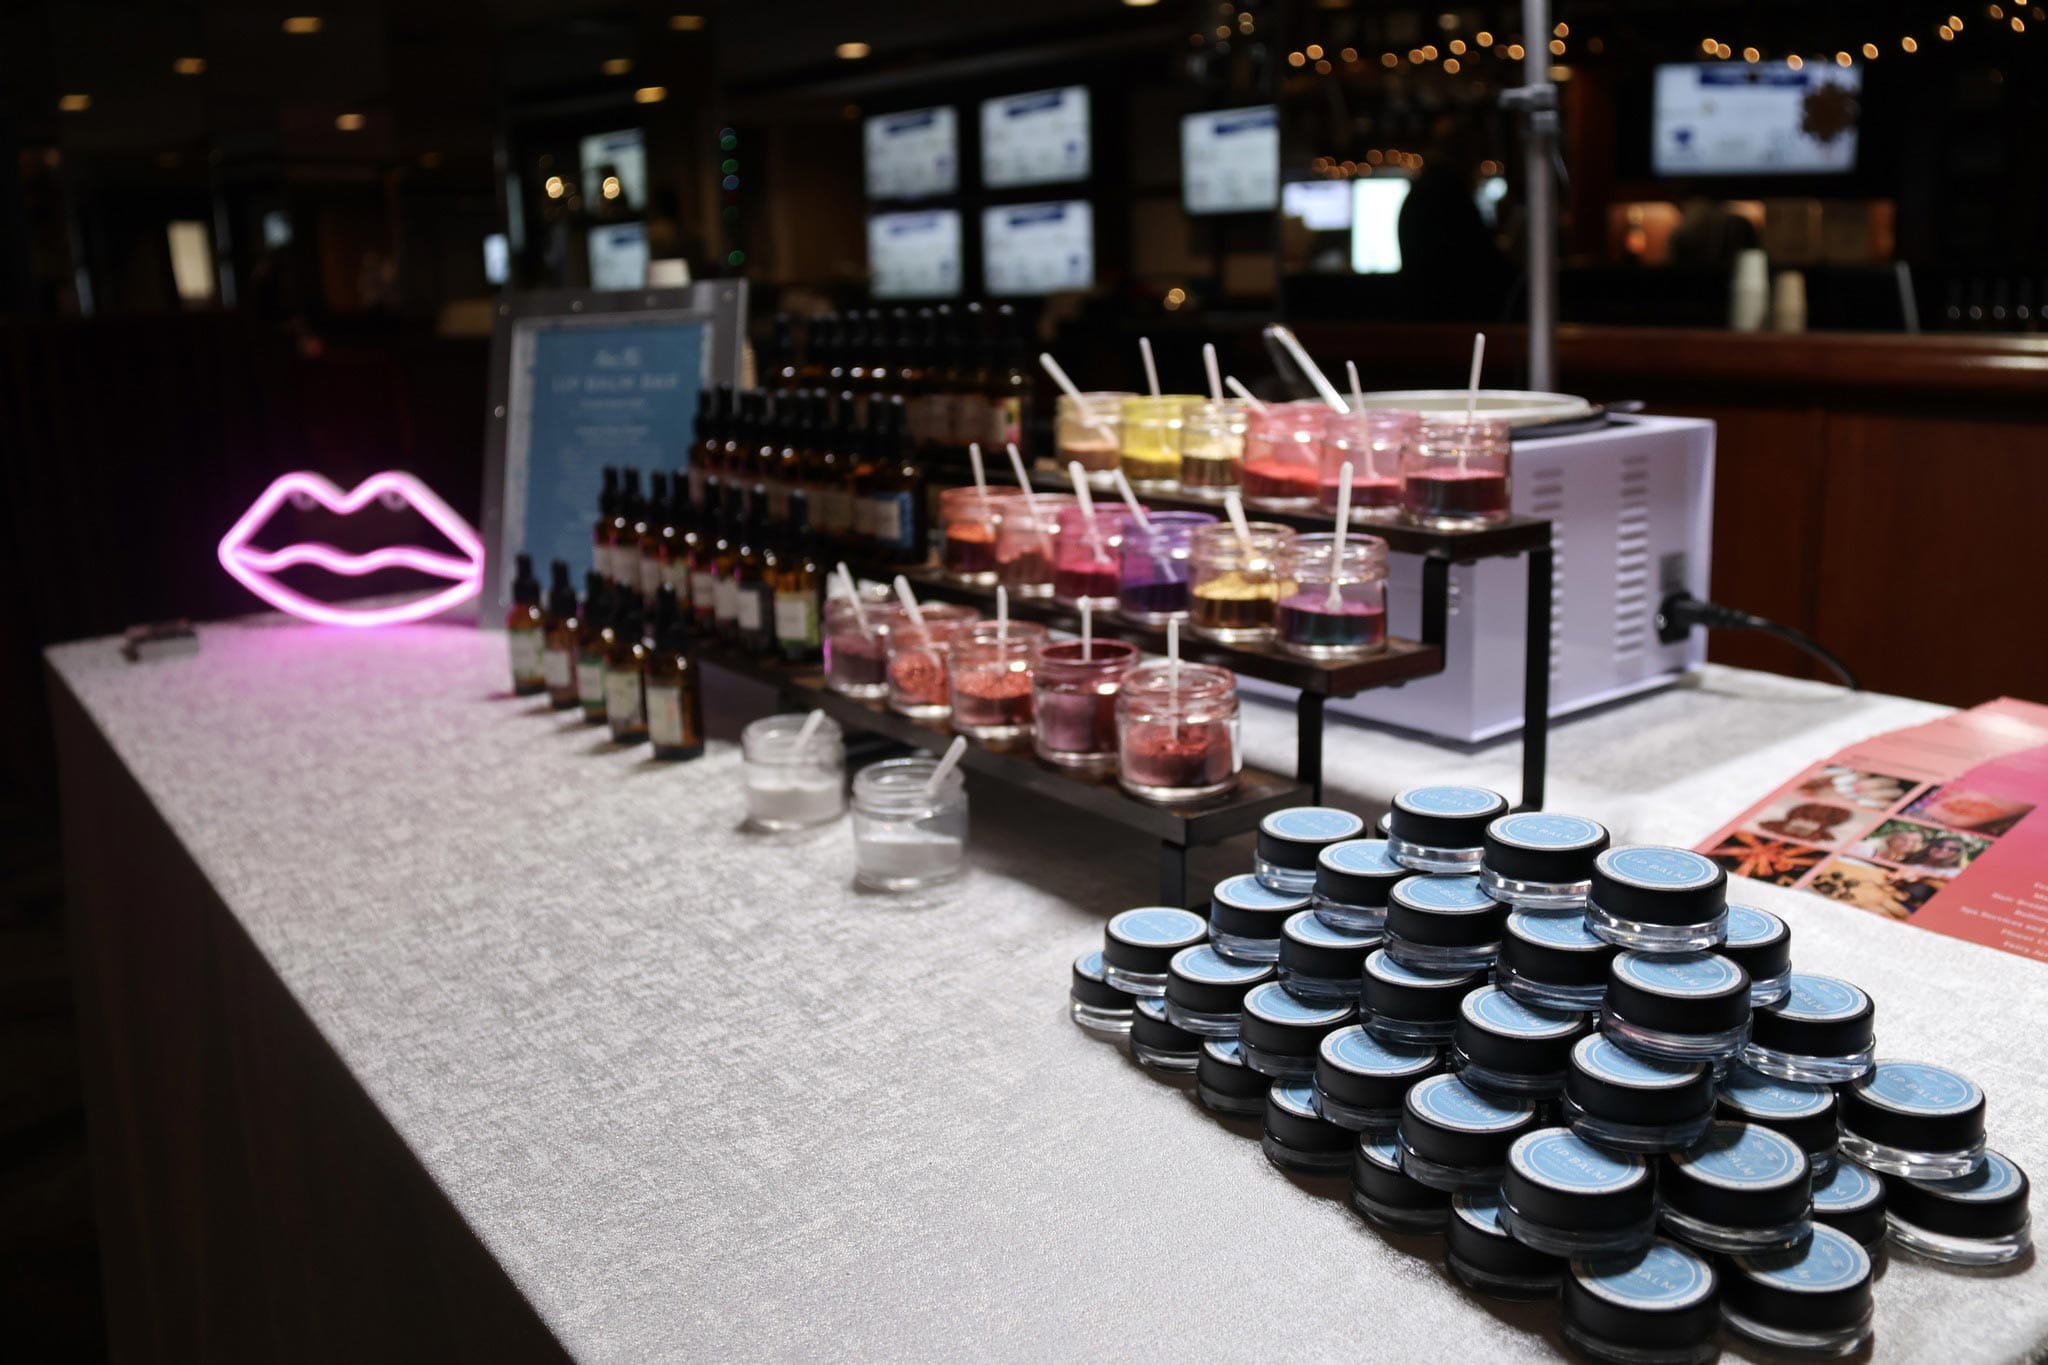 A cosmetics display at an event featuring a variety of lipsticks and other makeup products.